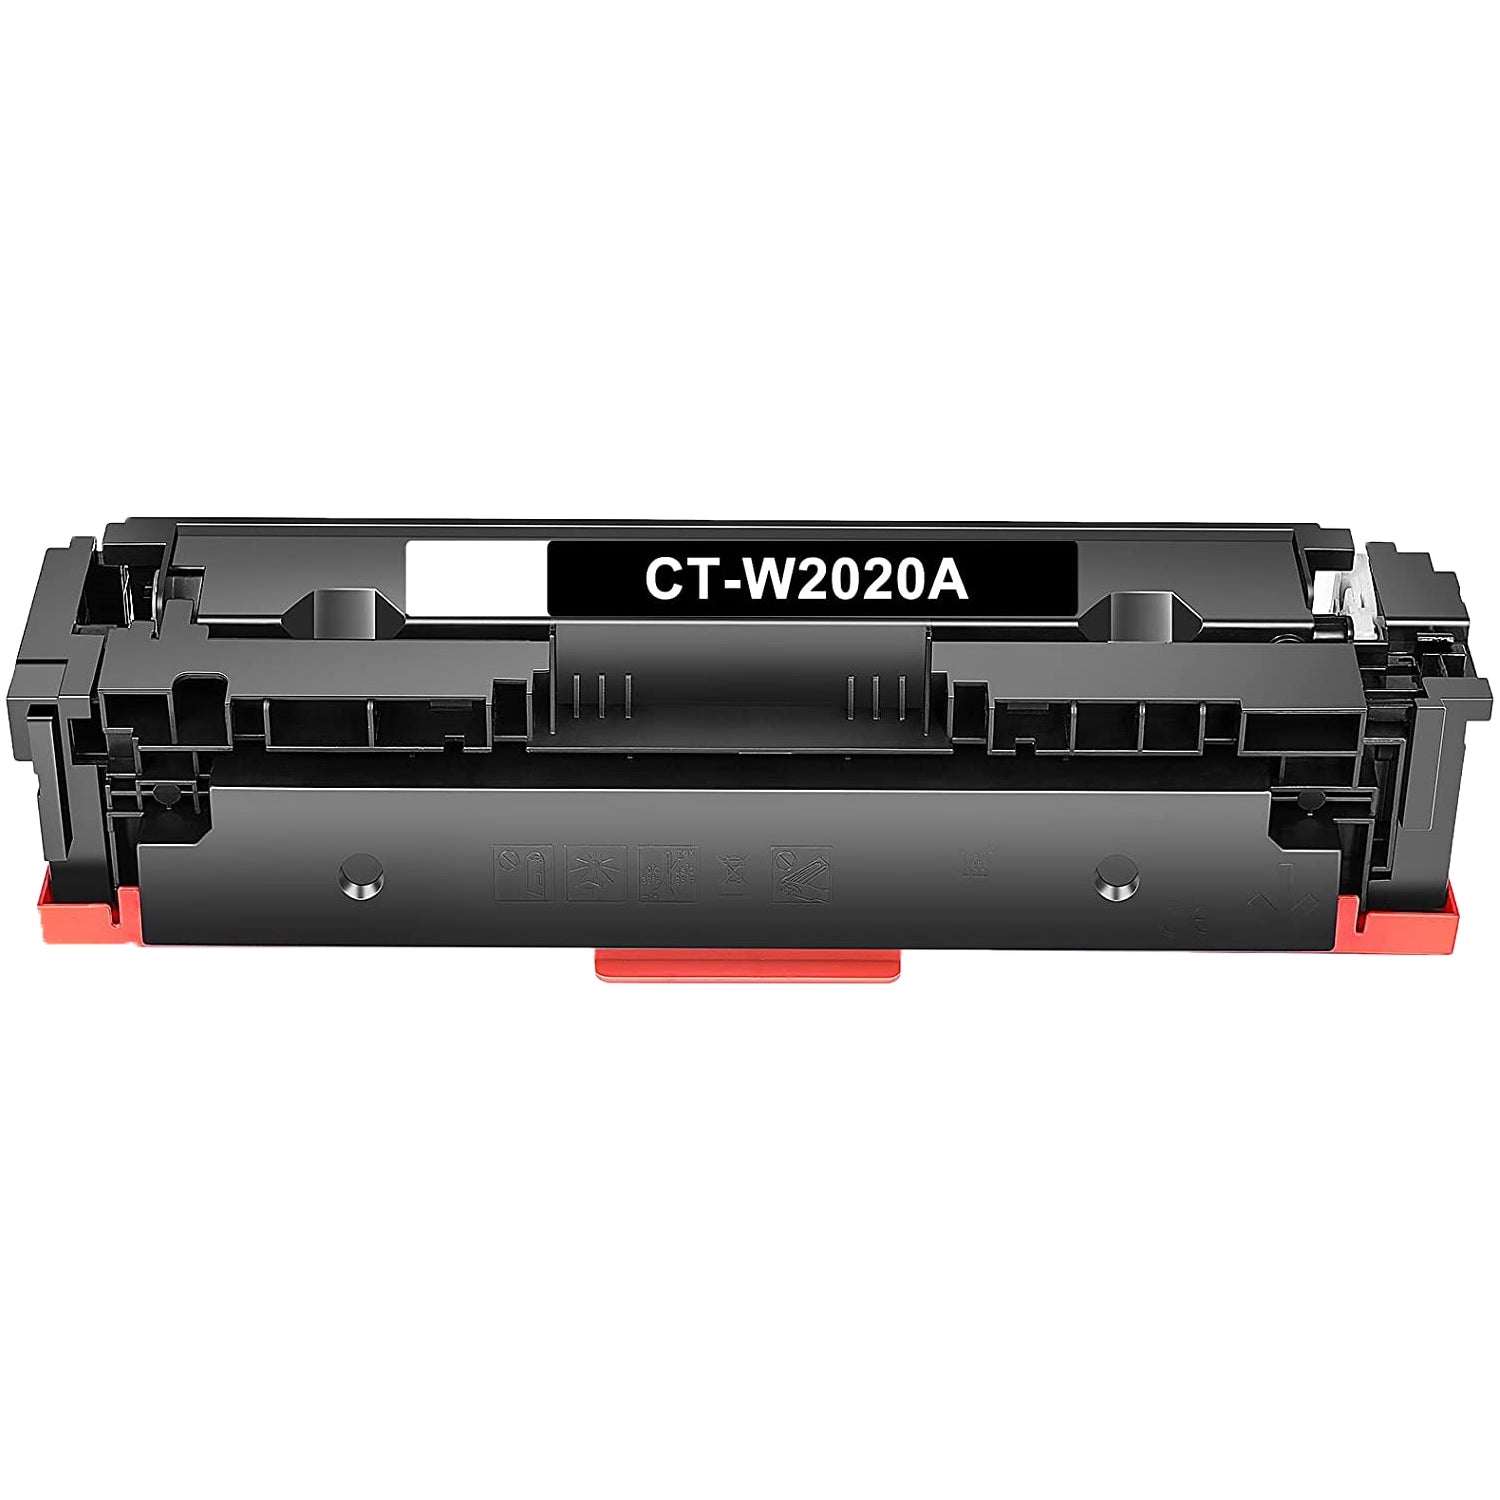 Absolute Toner Compatible HP 414A (W2020A) Black Laserjet Toner Cartridge - With Chip HP Toner Cartridges